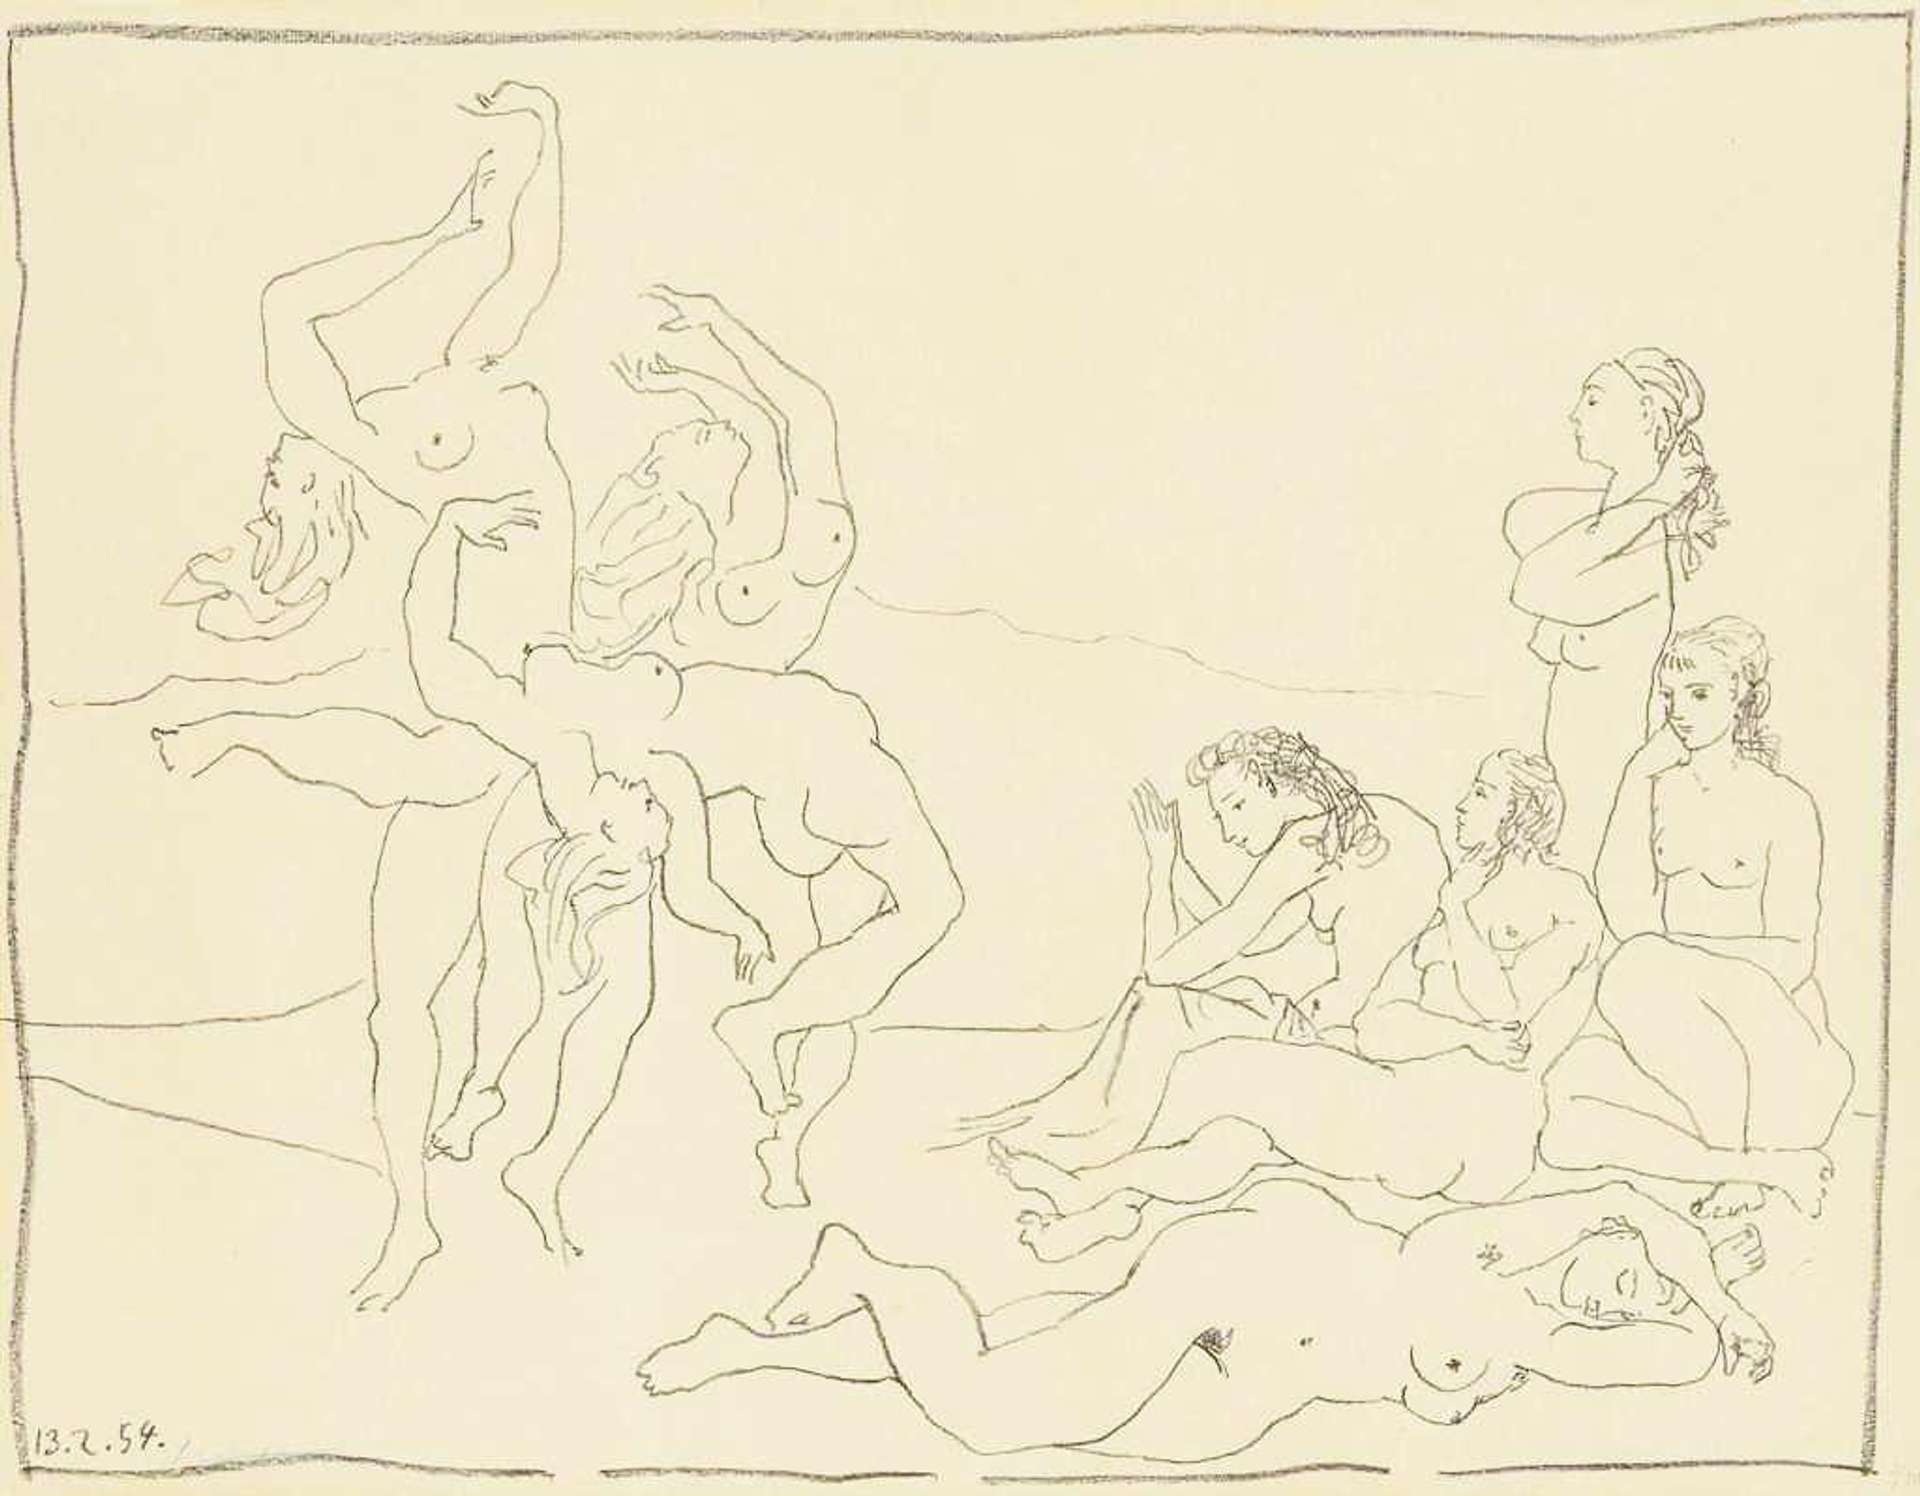 An etching by Picasso that shows a large group of nude women, some of which are dancing and some of which are watching or sleeping.